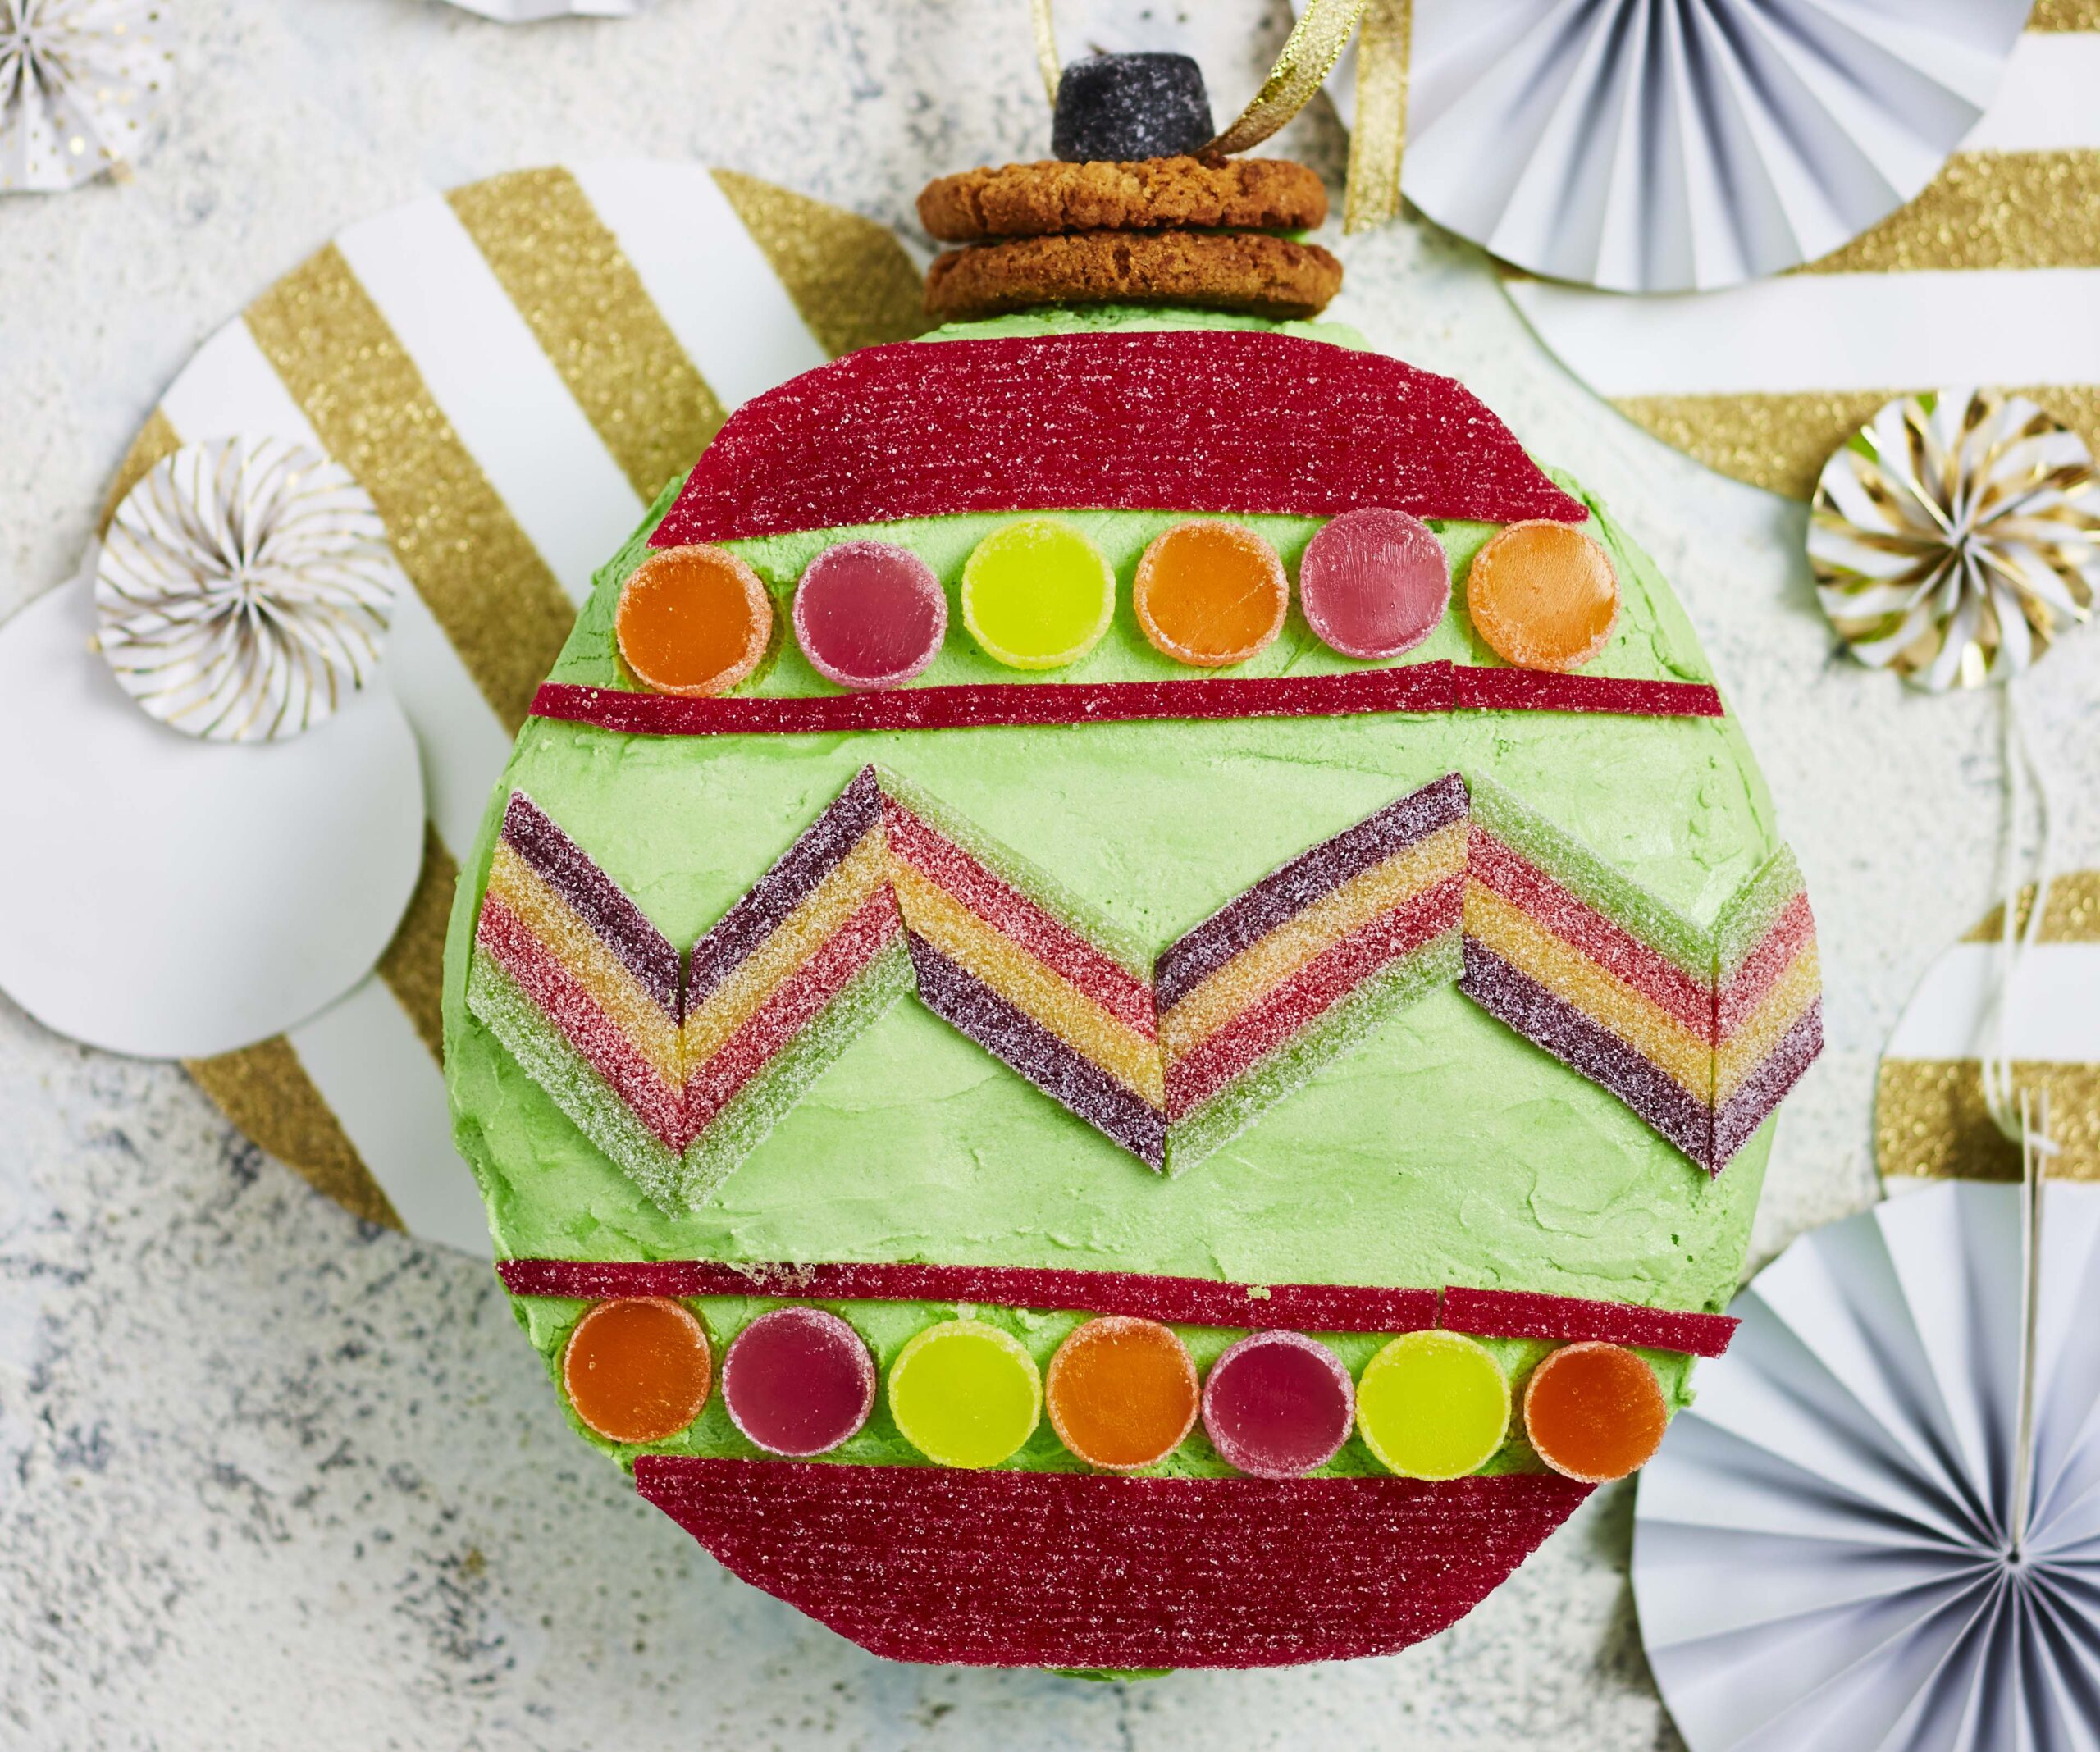 3 ways to use a store-bought mud cake this Christmas